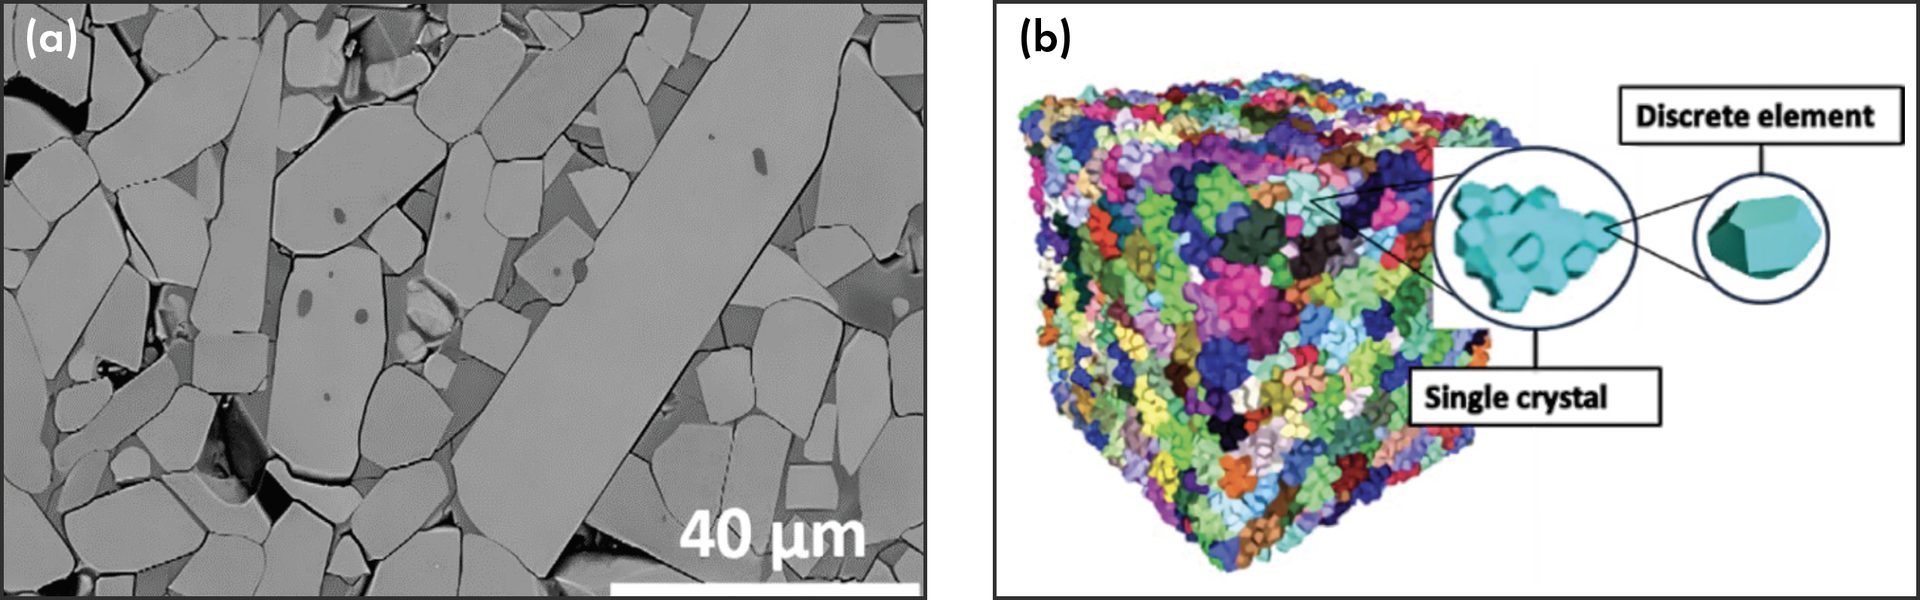 The real microstructure1 and DEM model of aluminum titanate